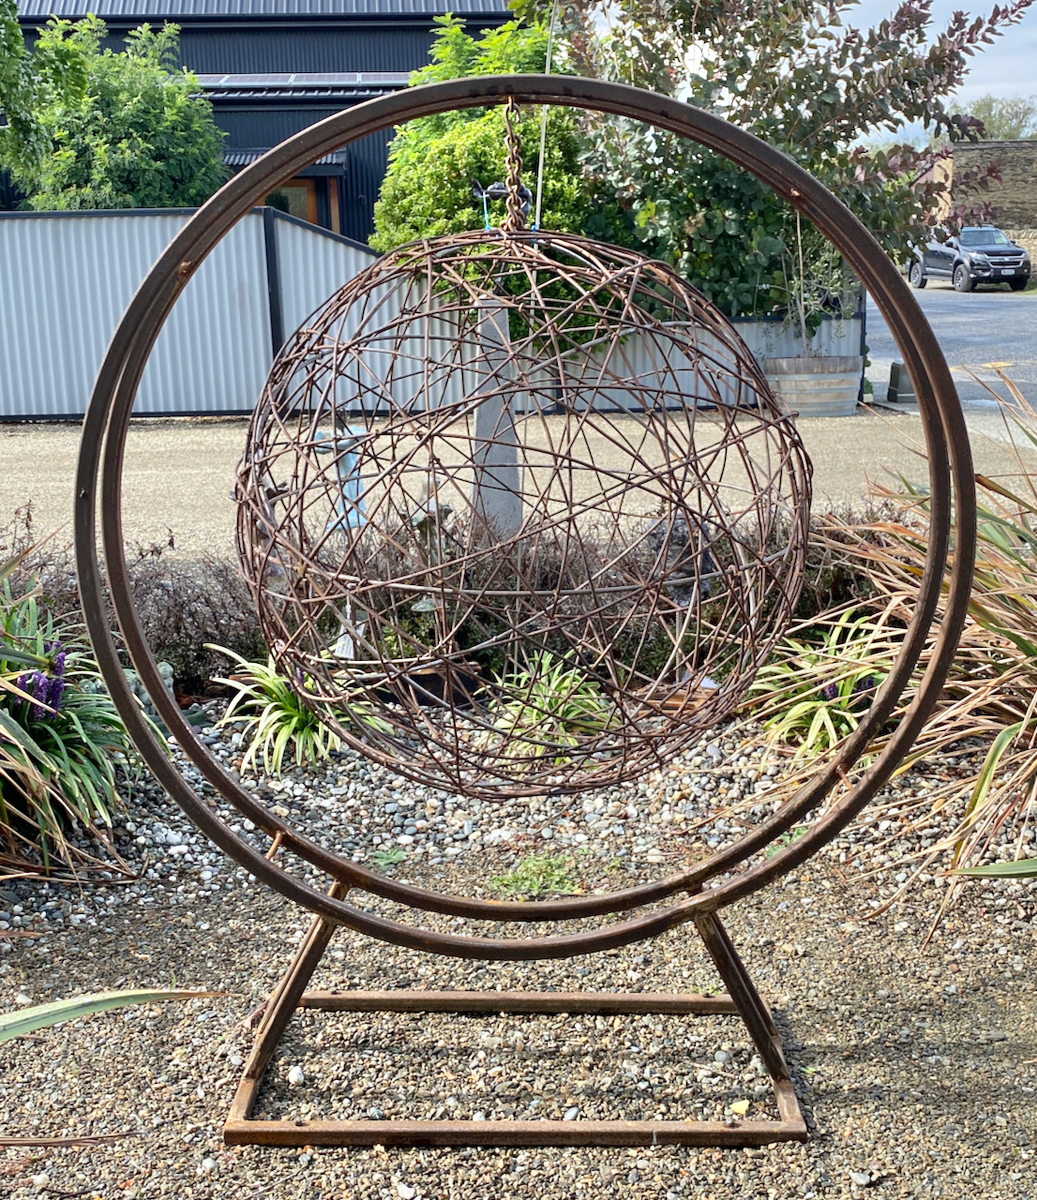 Suspended - Circle Sculpture with rusty wire ball